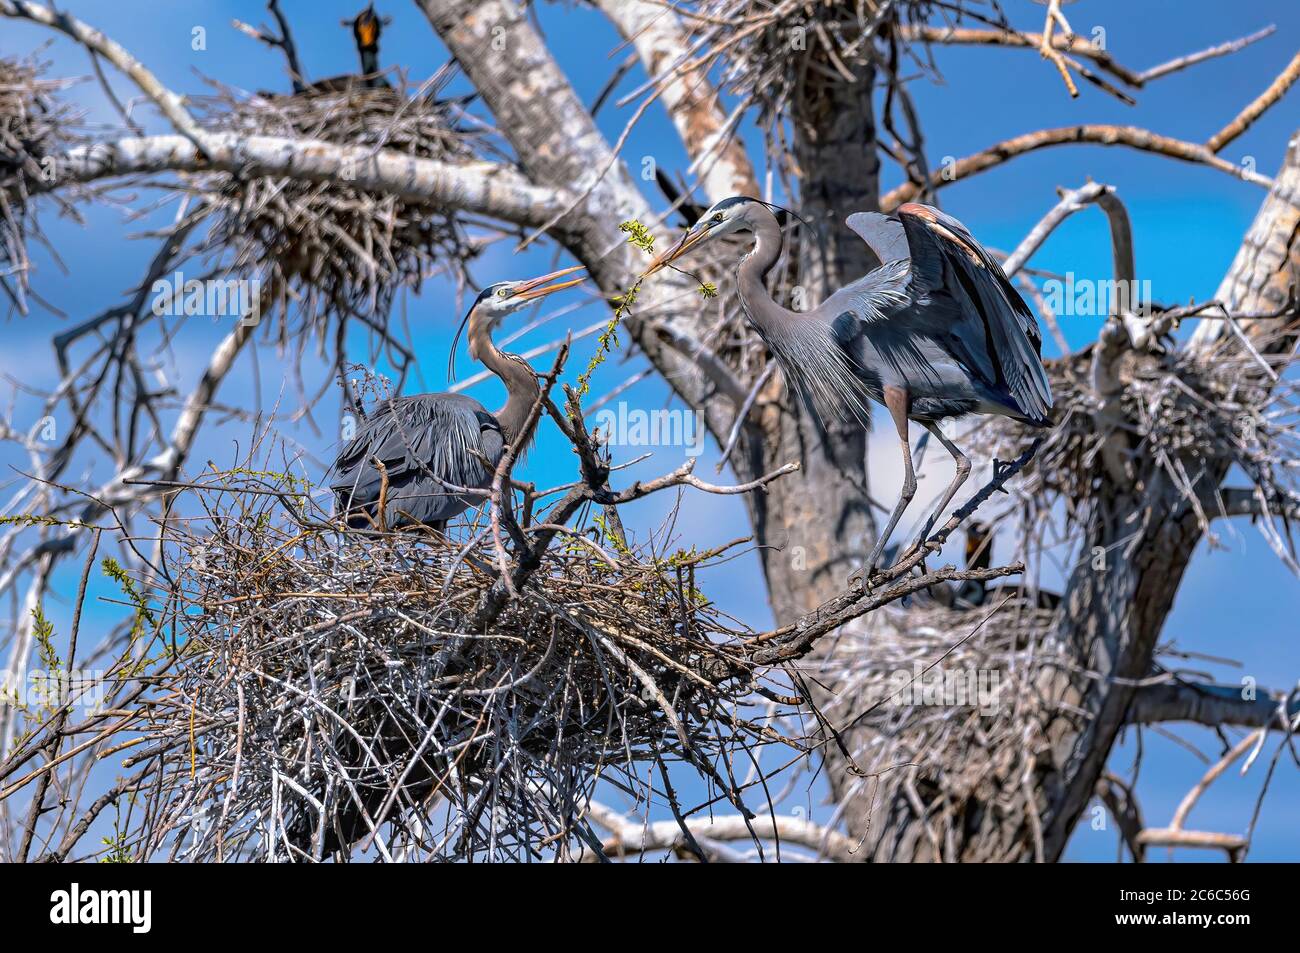 A Female Great Blue Heron eagerly awaits the branch that her mate has brought to their nest site. Stock Photo